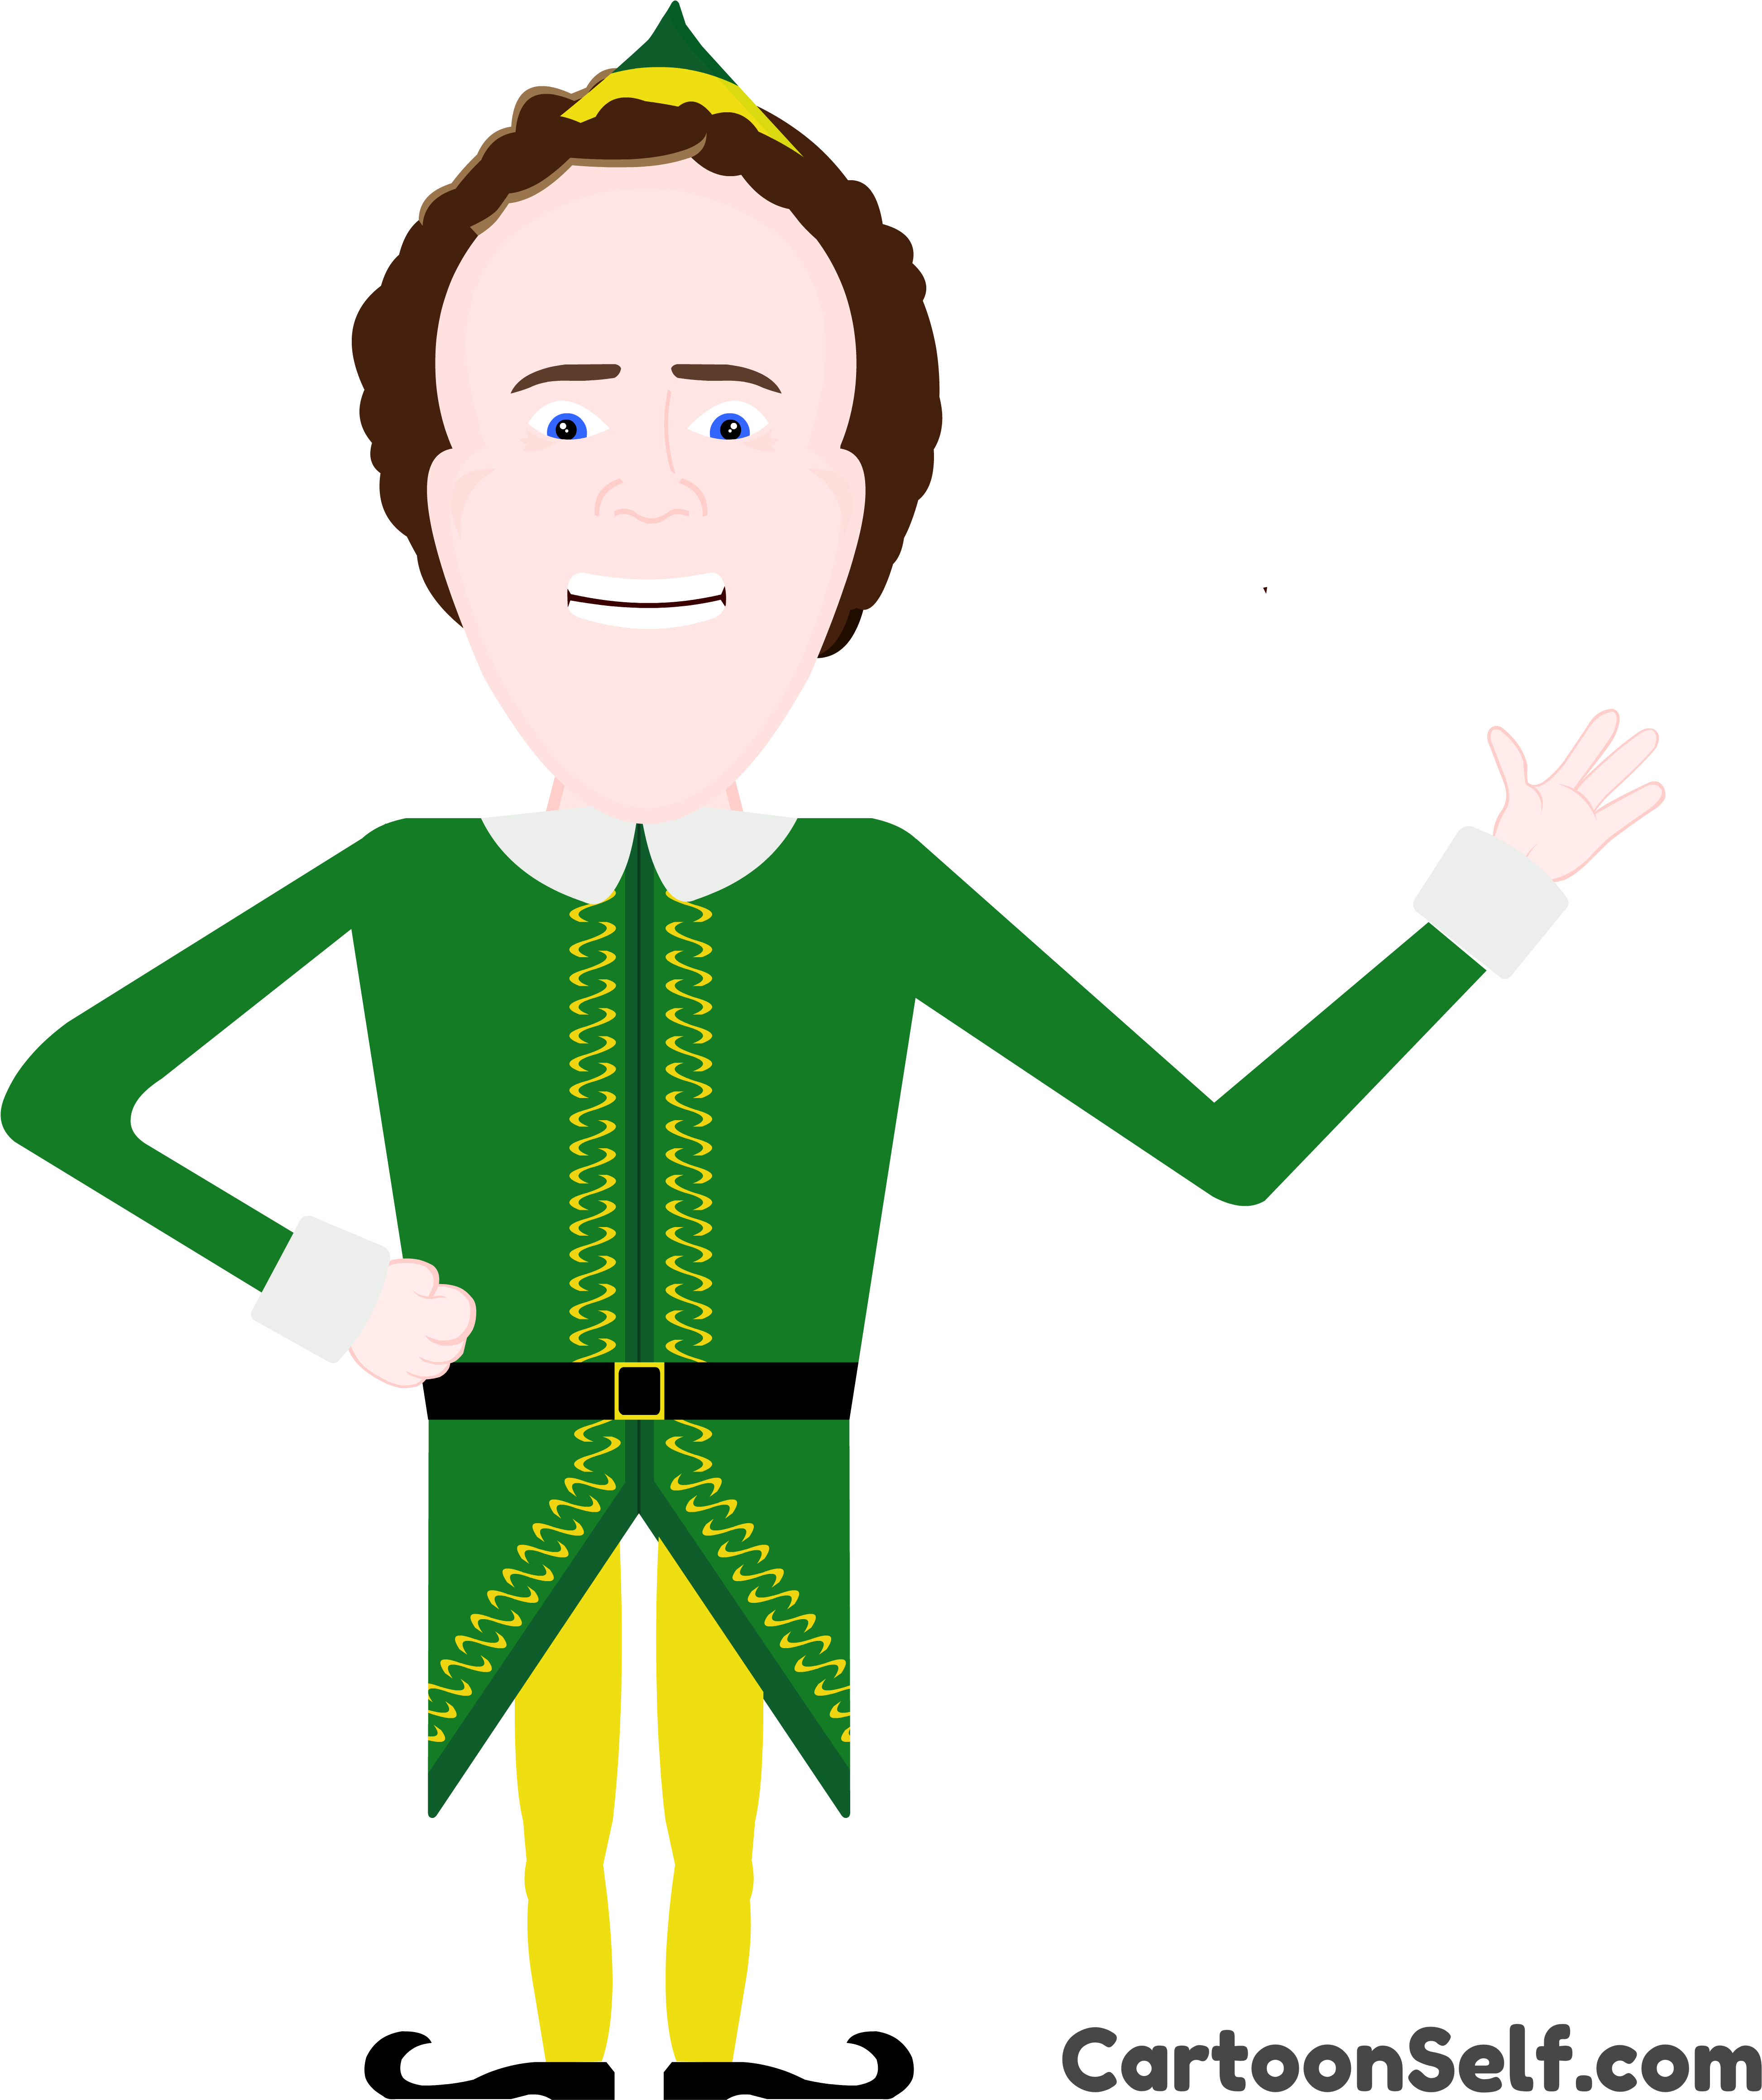 Buddy The Elf Wins You Over With His Sense Of Humor - Cartoon (3992x4670)